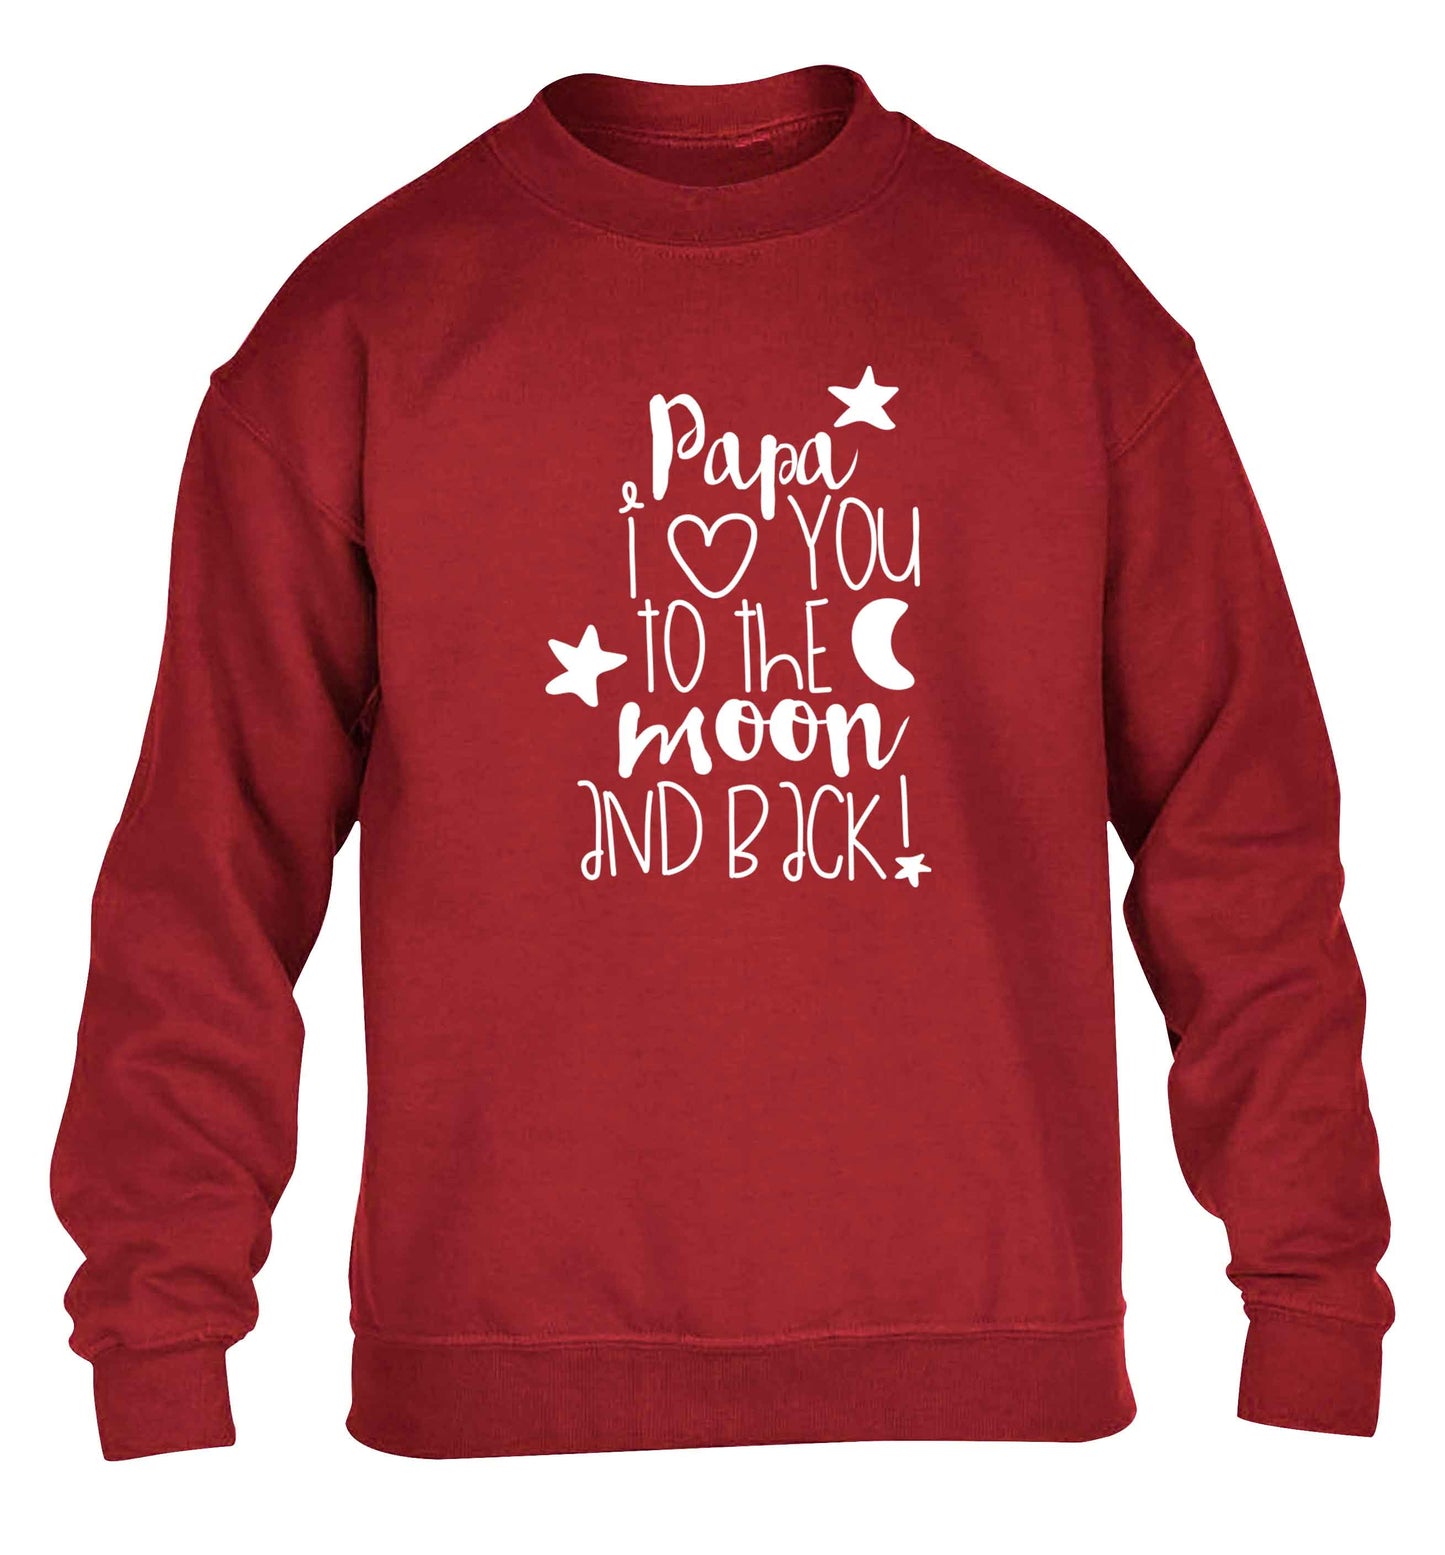 Papa I love you to the moon and back children's grey sweater 12-13 Years